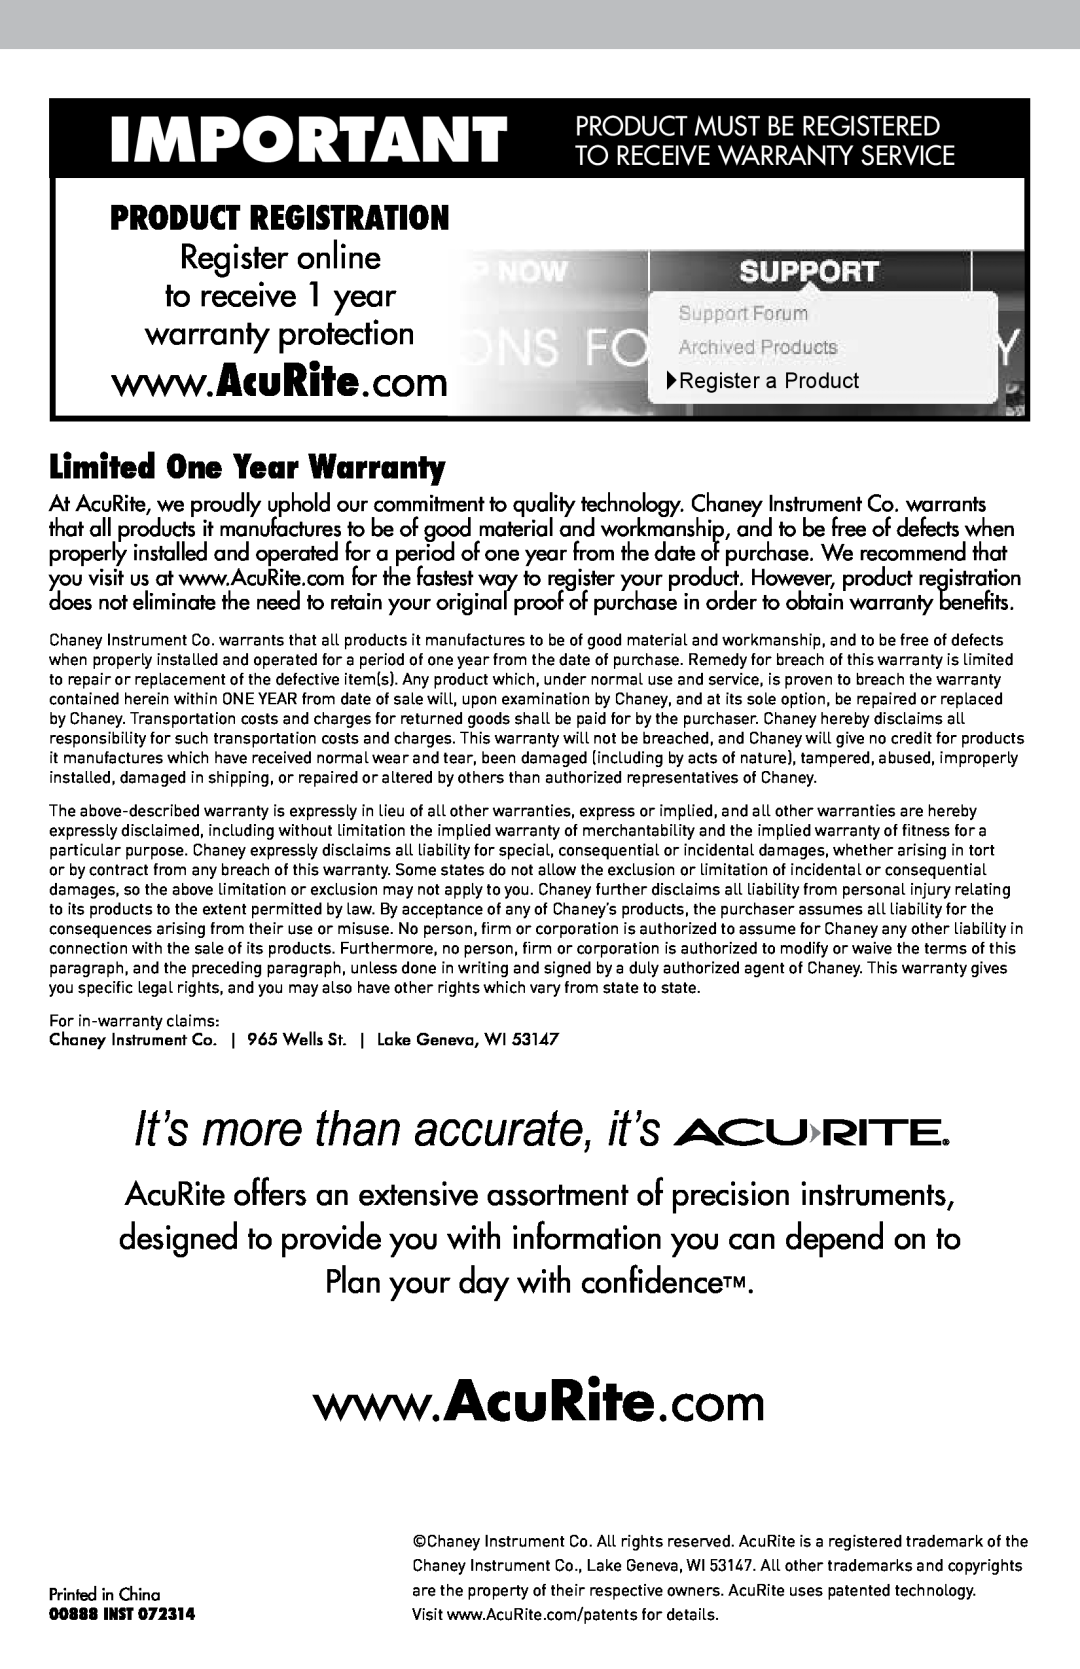 Acu-Rite 888 Product Registration, Limited One Year Warranty, It’s more than accurate, it’s, Register a Product, Inst 